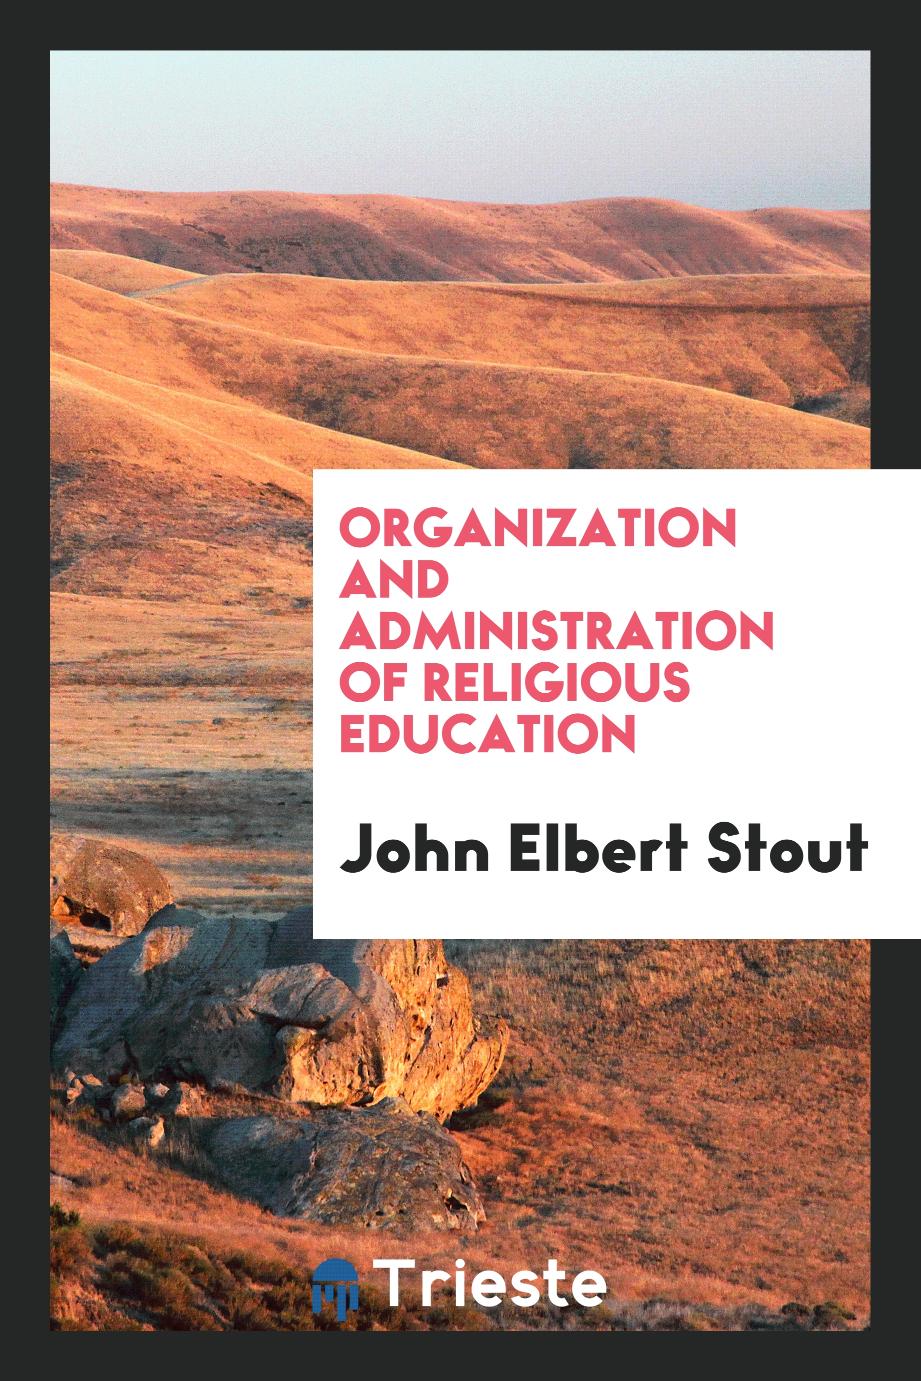 Organization and administration of religious education